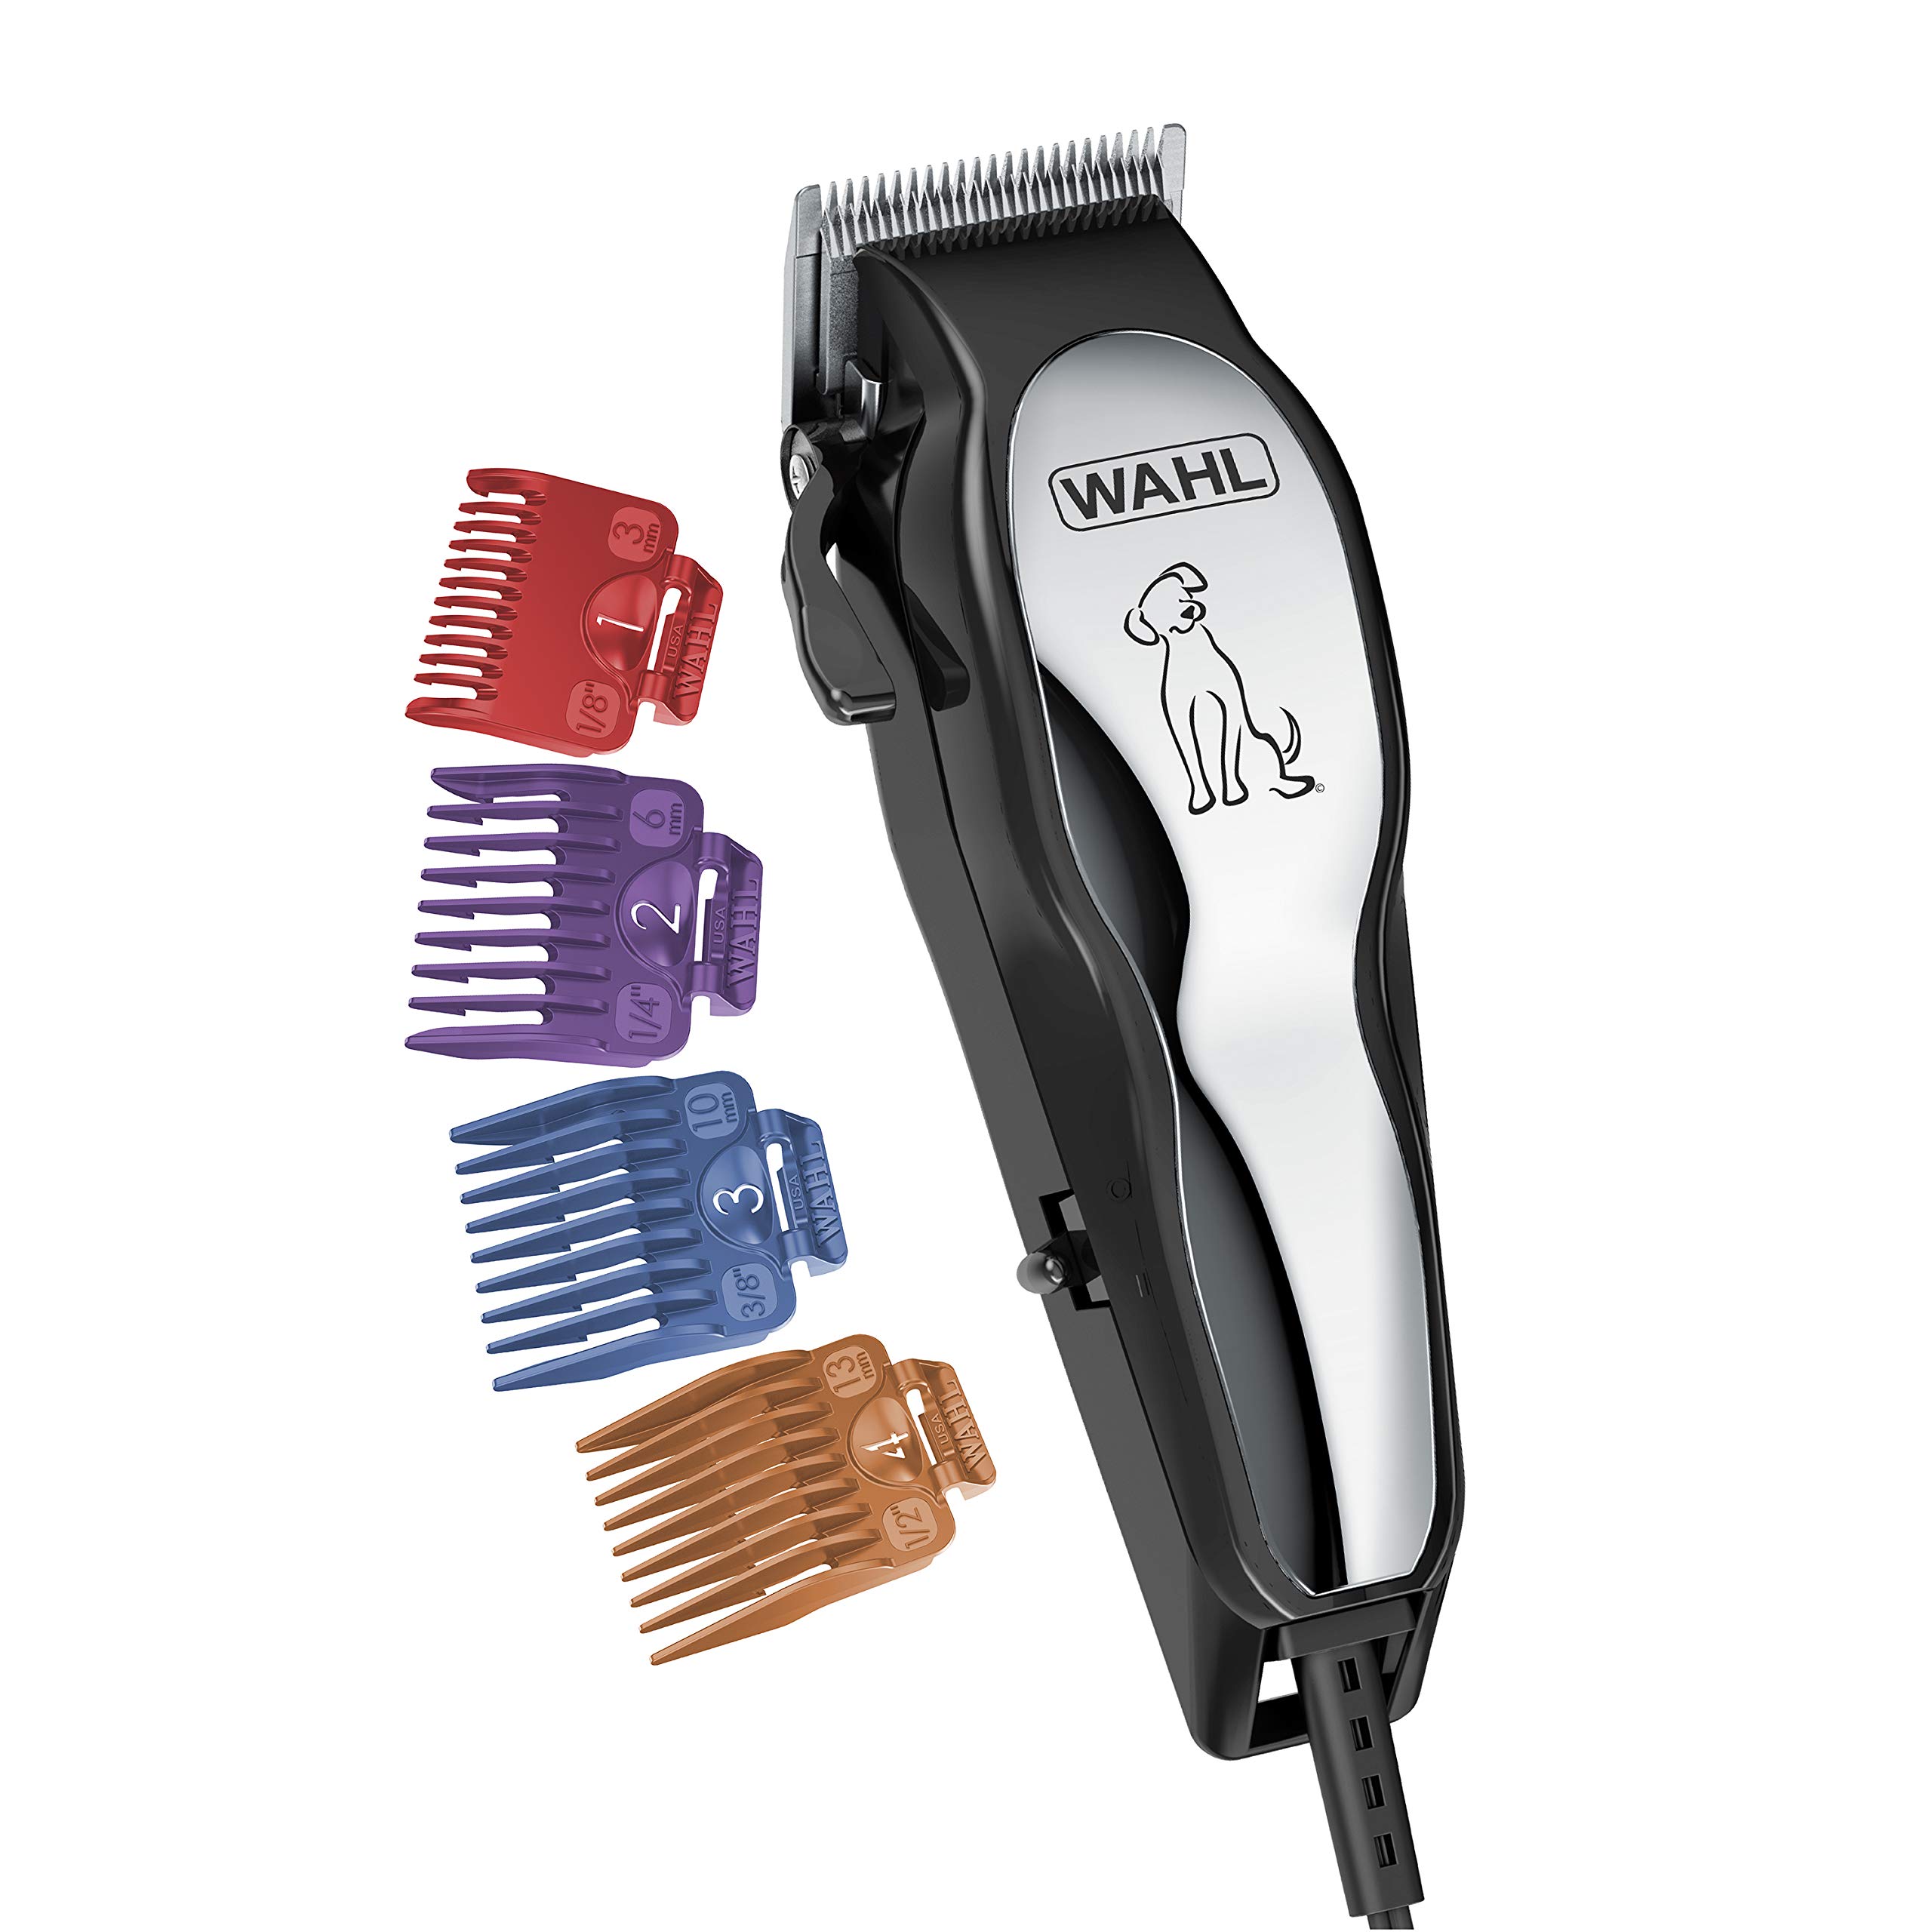 WAHL USA Clipper Pet-Pro Dog Grooming Kit - Electric Corded Dog Clipper for Dogs & Cats with Fine & Medium Coats - Model 9281-210